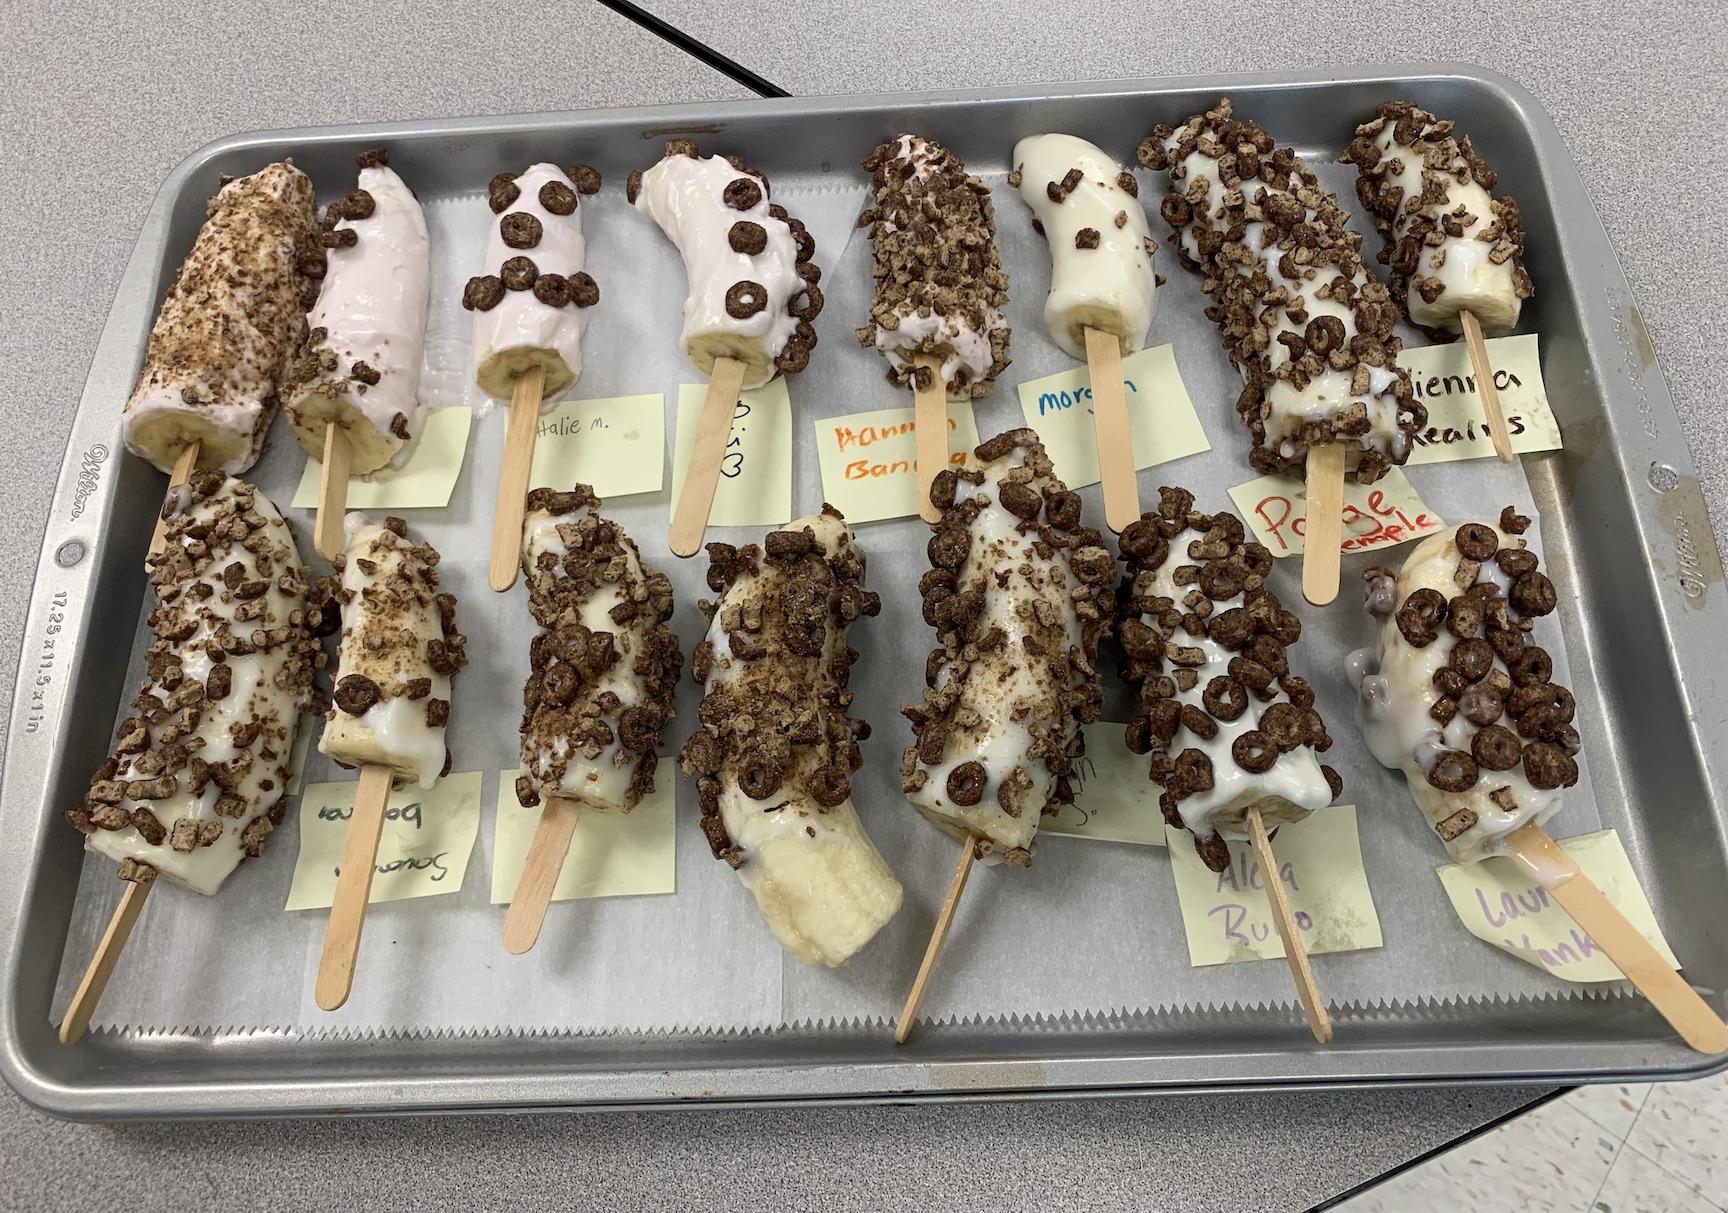 The completed banana lollipops